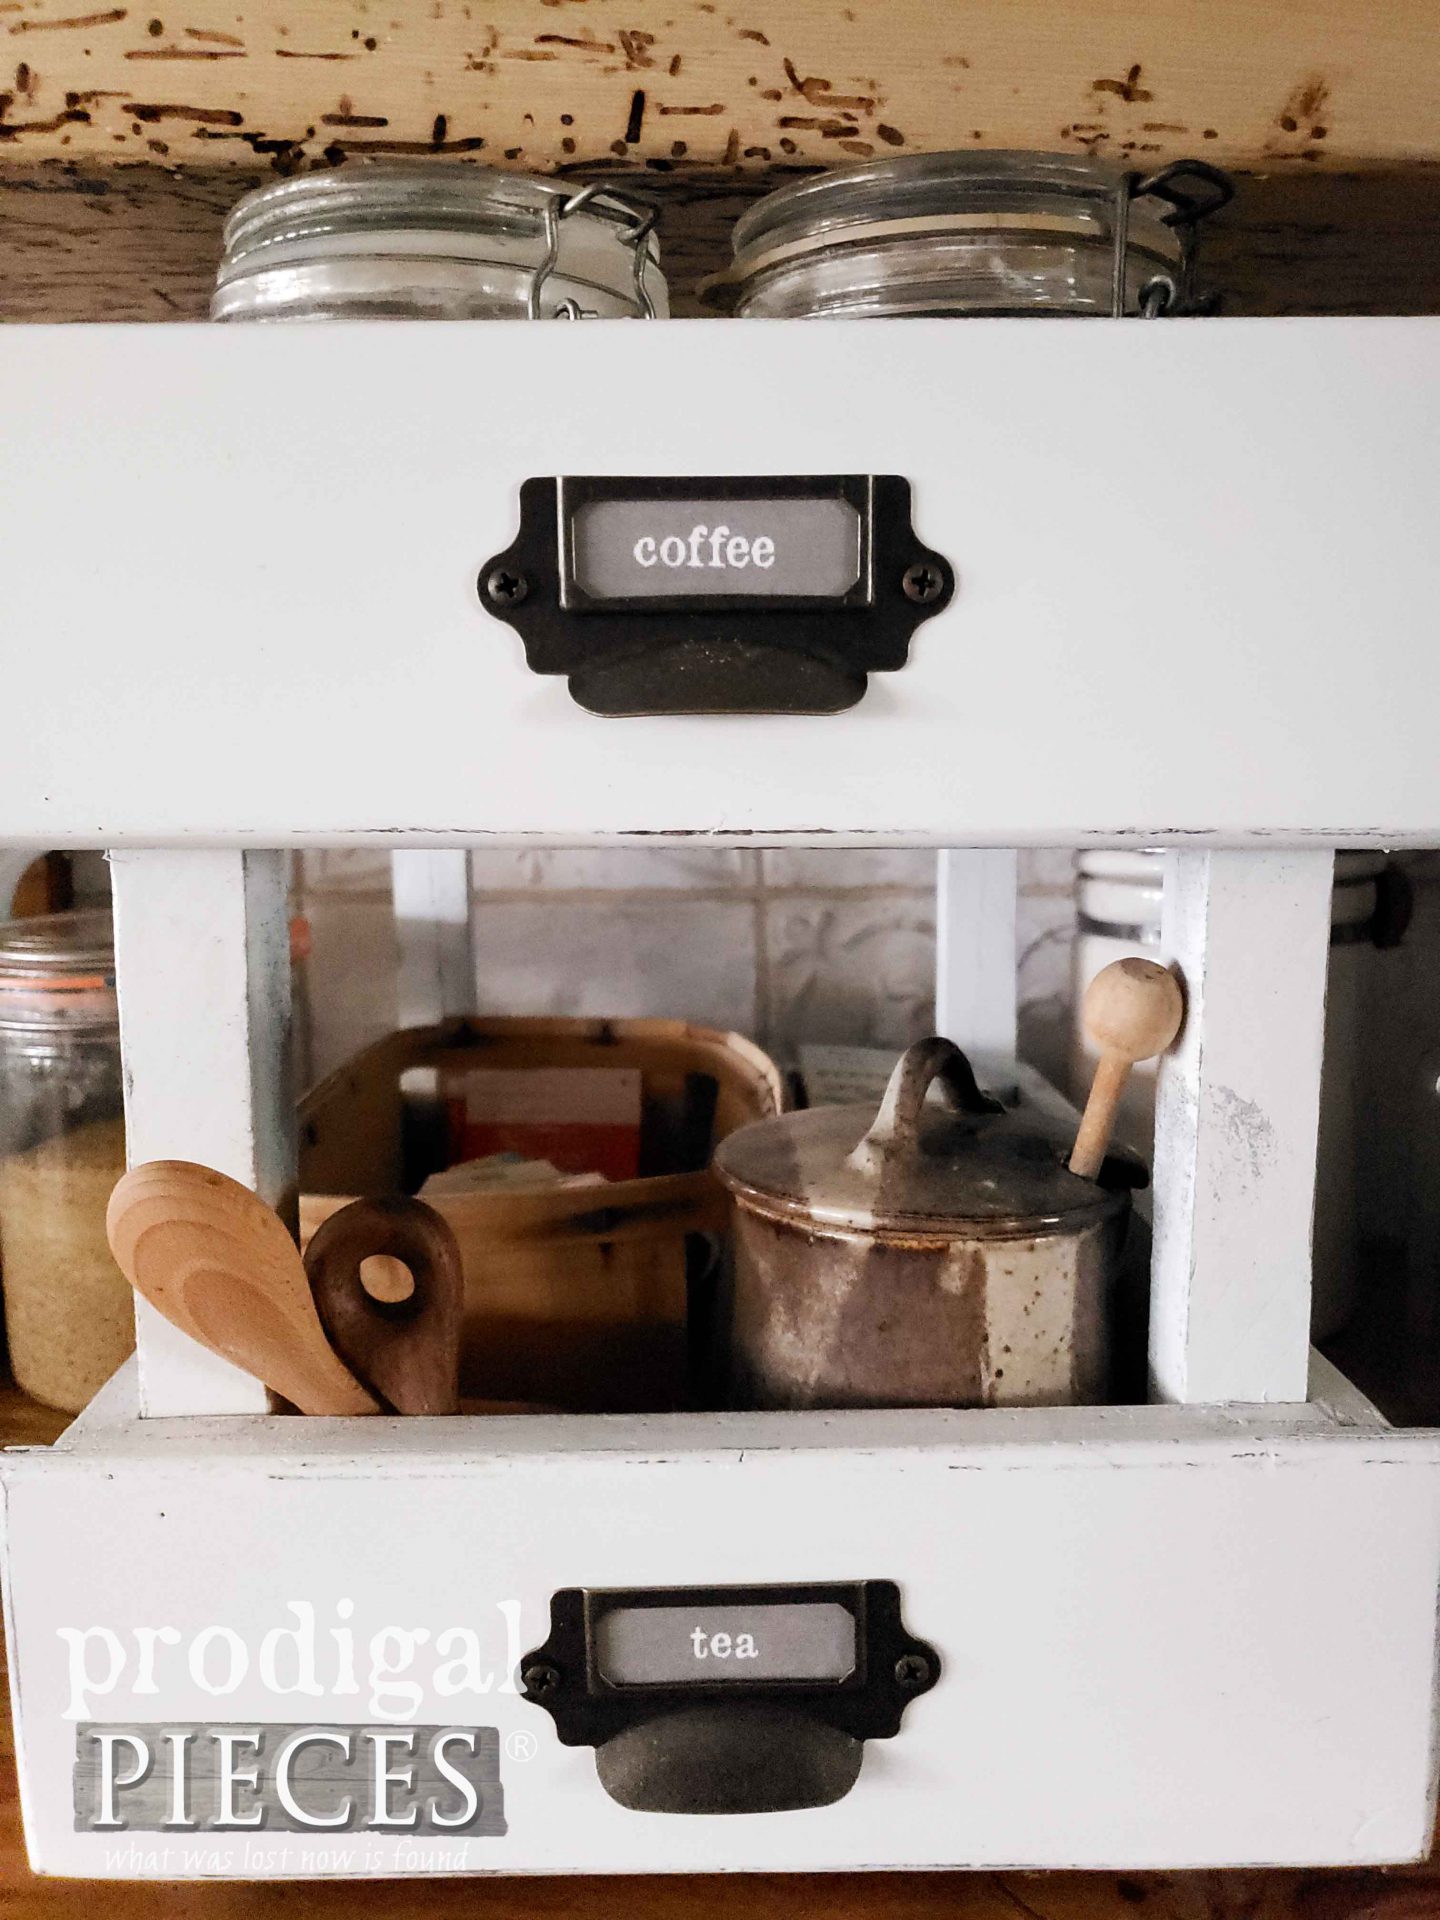 Apothecary Bin Label Pulls on DIY Upcycled Drawers Tiered Stand by Larissa of Prodigal Pieces | prodigalpieces.com #prodigalpieces #farmhouse #diy #home #homedecor